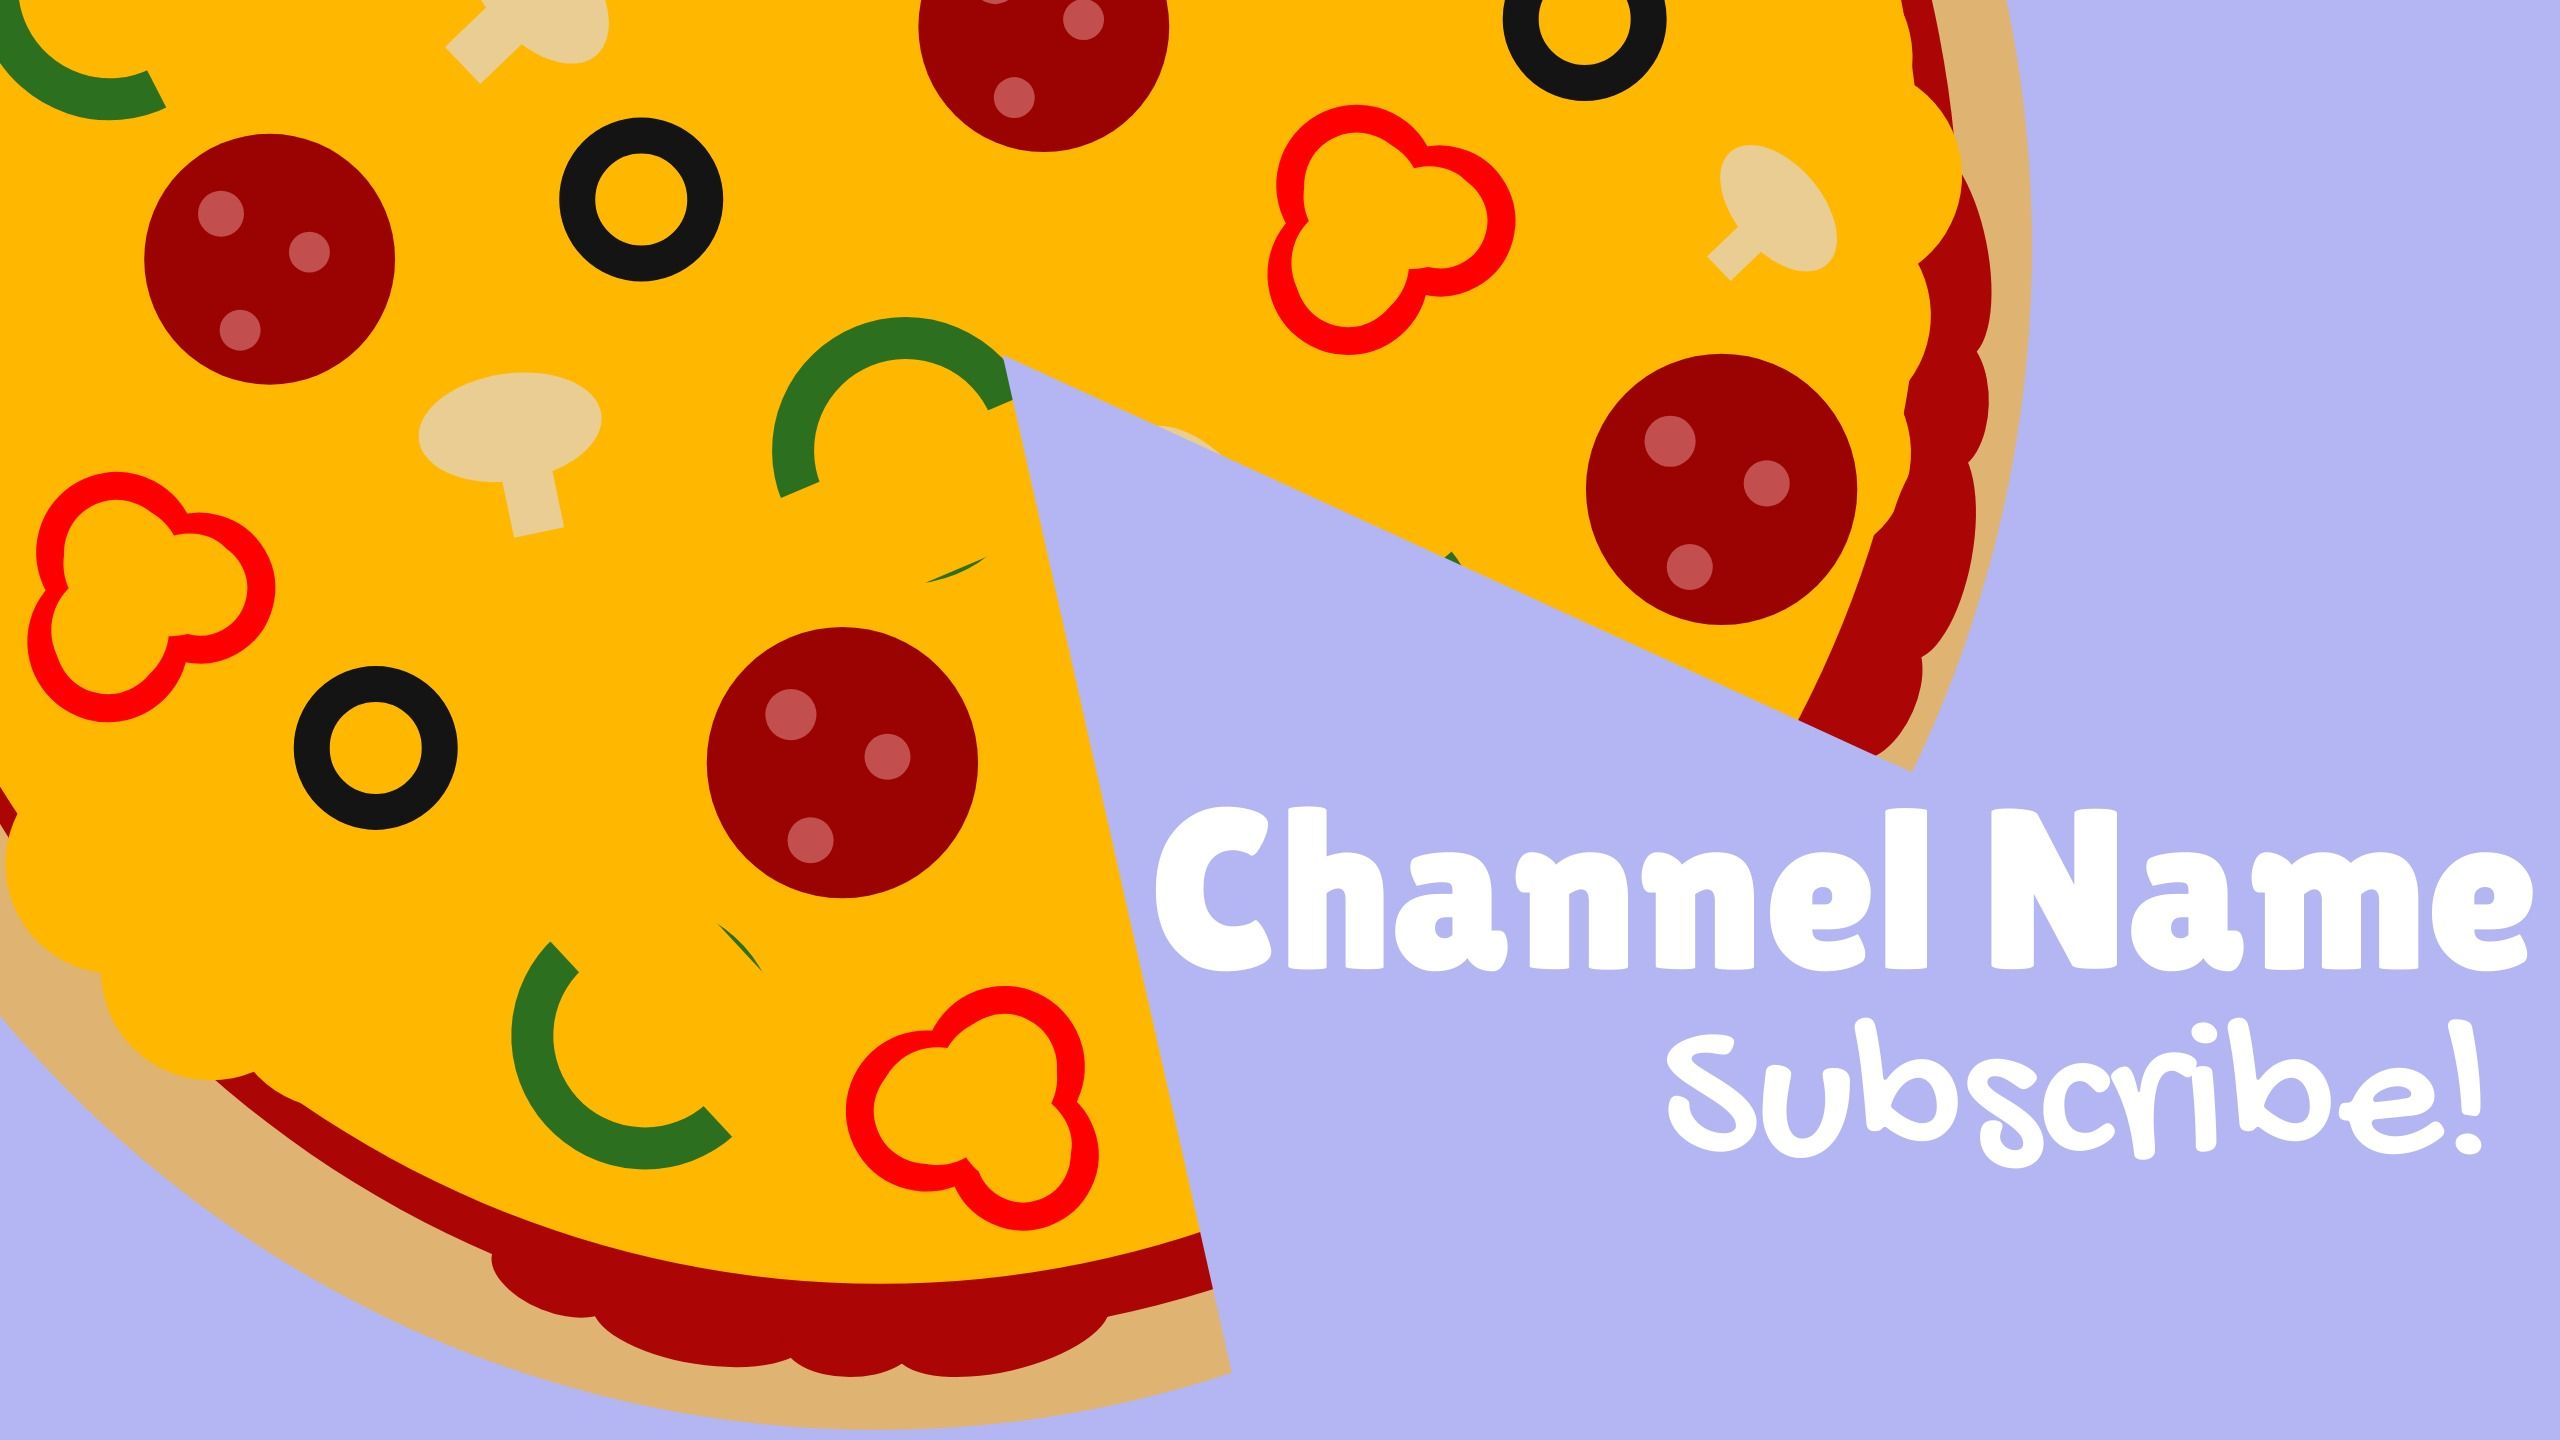 Pizza banner template for a YouTube channel - YouTube channel names: Fresh inspirational ideas - Image